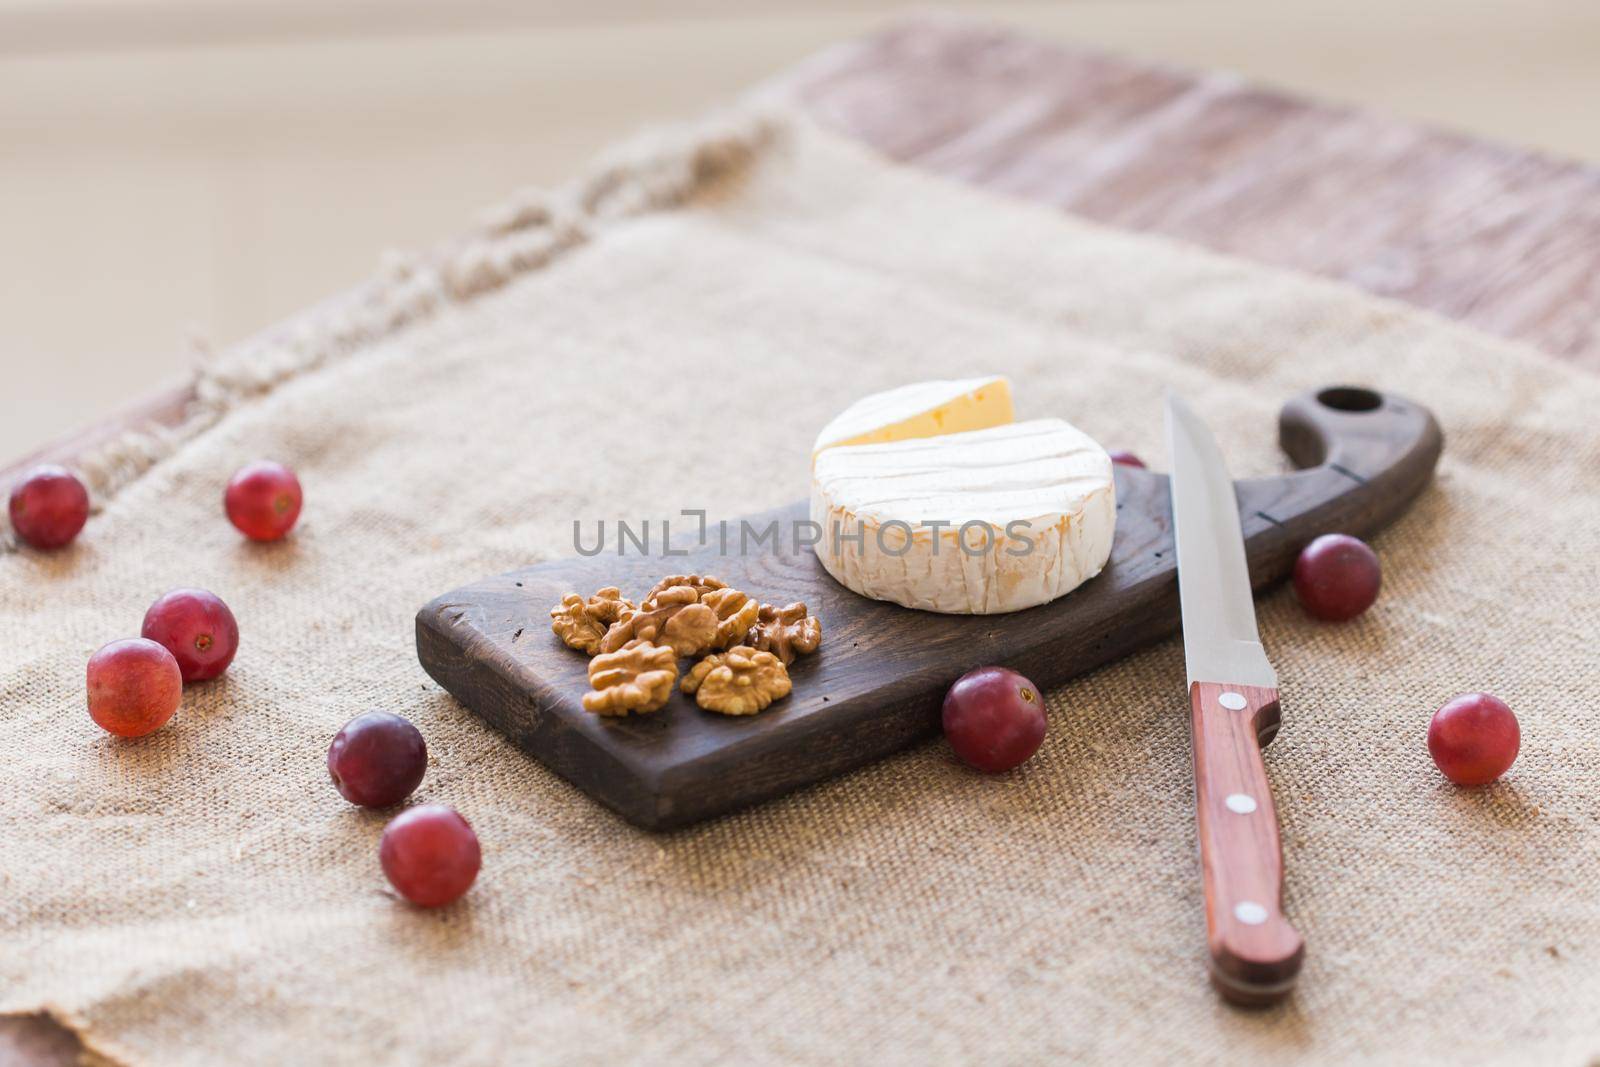 Brie or camembert cheese with nuts and grapes on a wooden board by Satura86